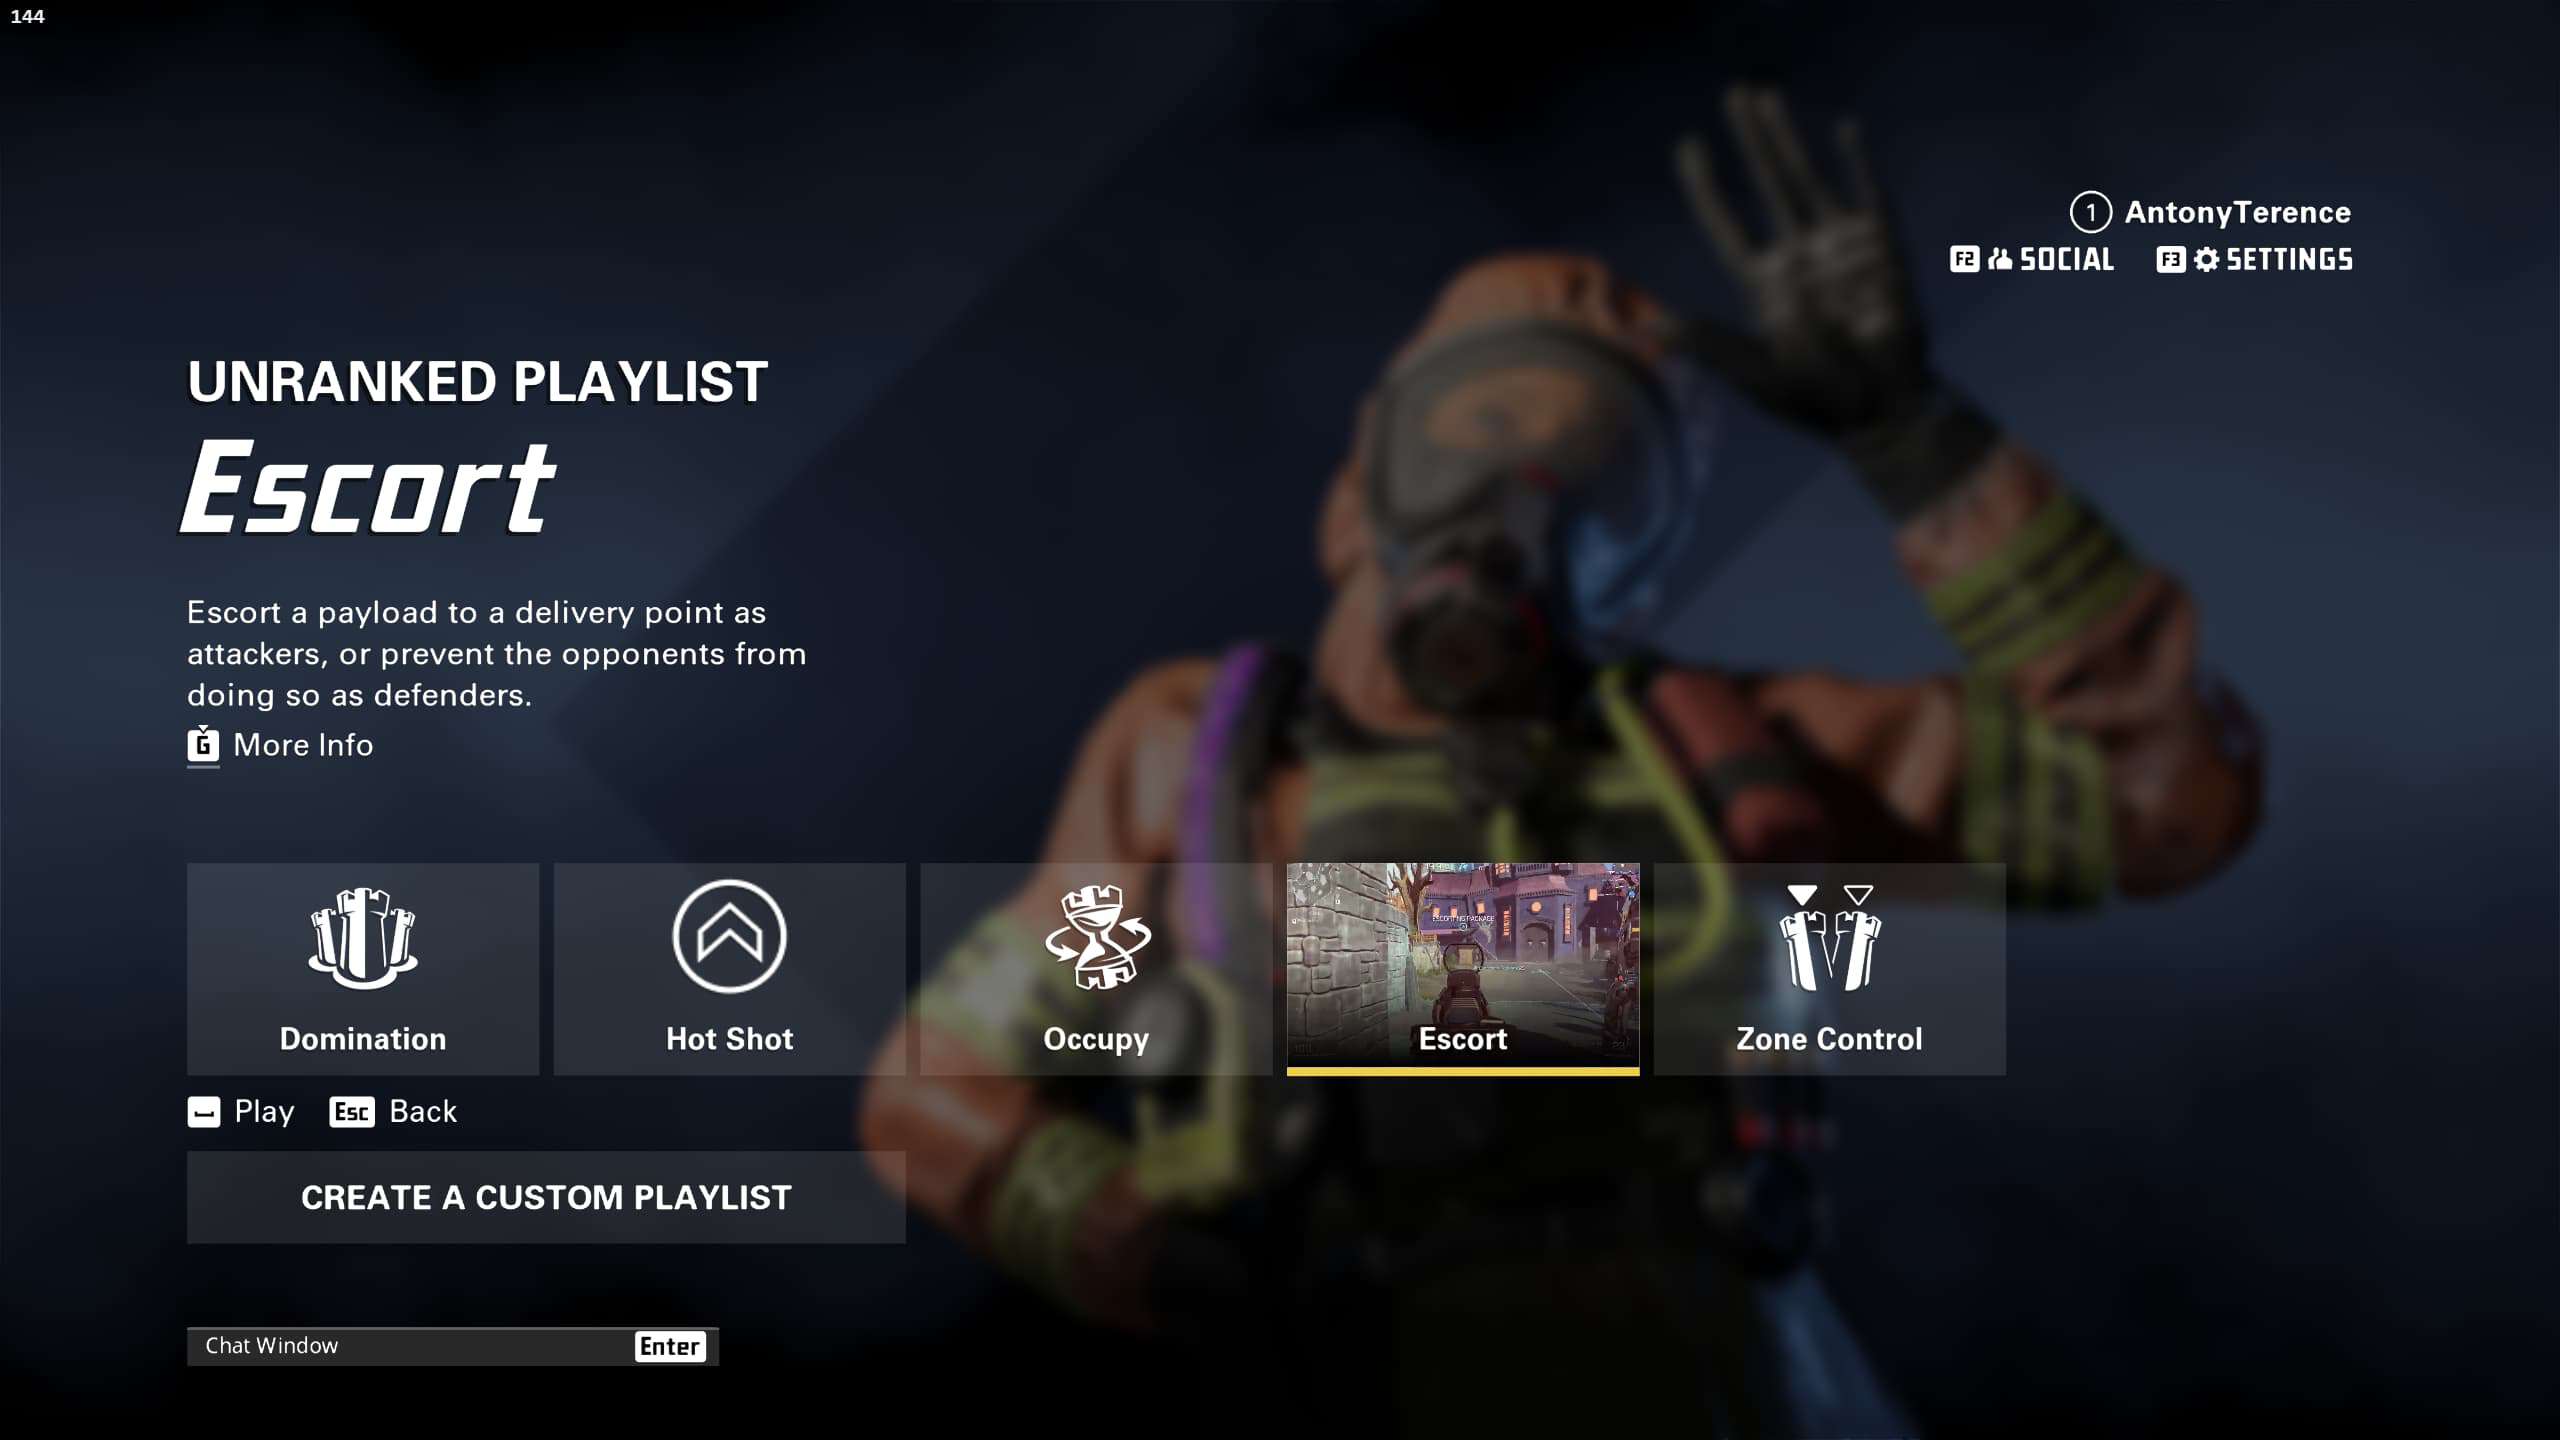 The video game screen showcases an unranked playlist featuring various XDefiant game modes, including Escort, Domination, Hot Shot, Occupy, and Zone Control. In the background is a character in a mask.